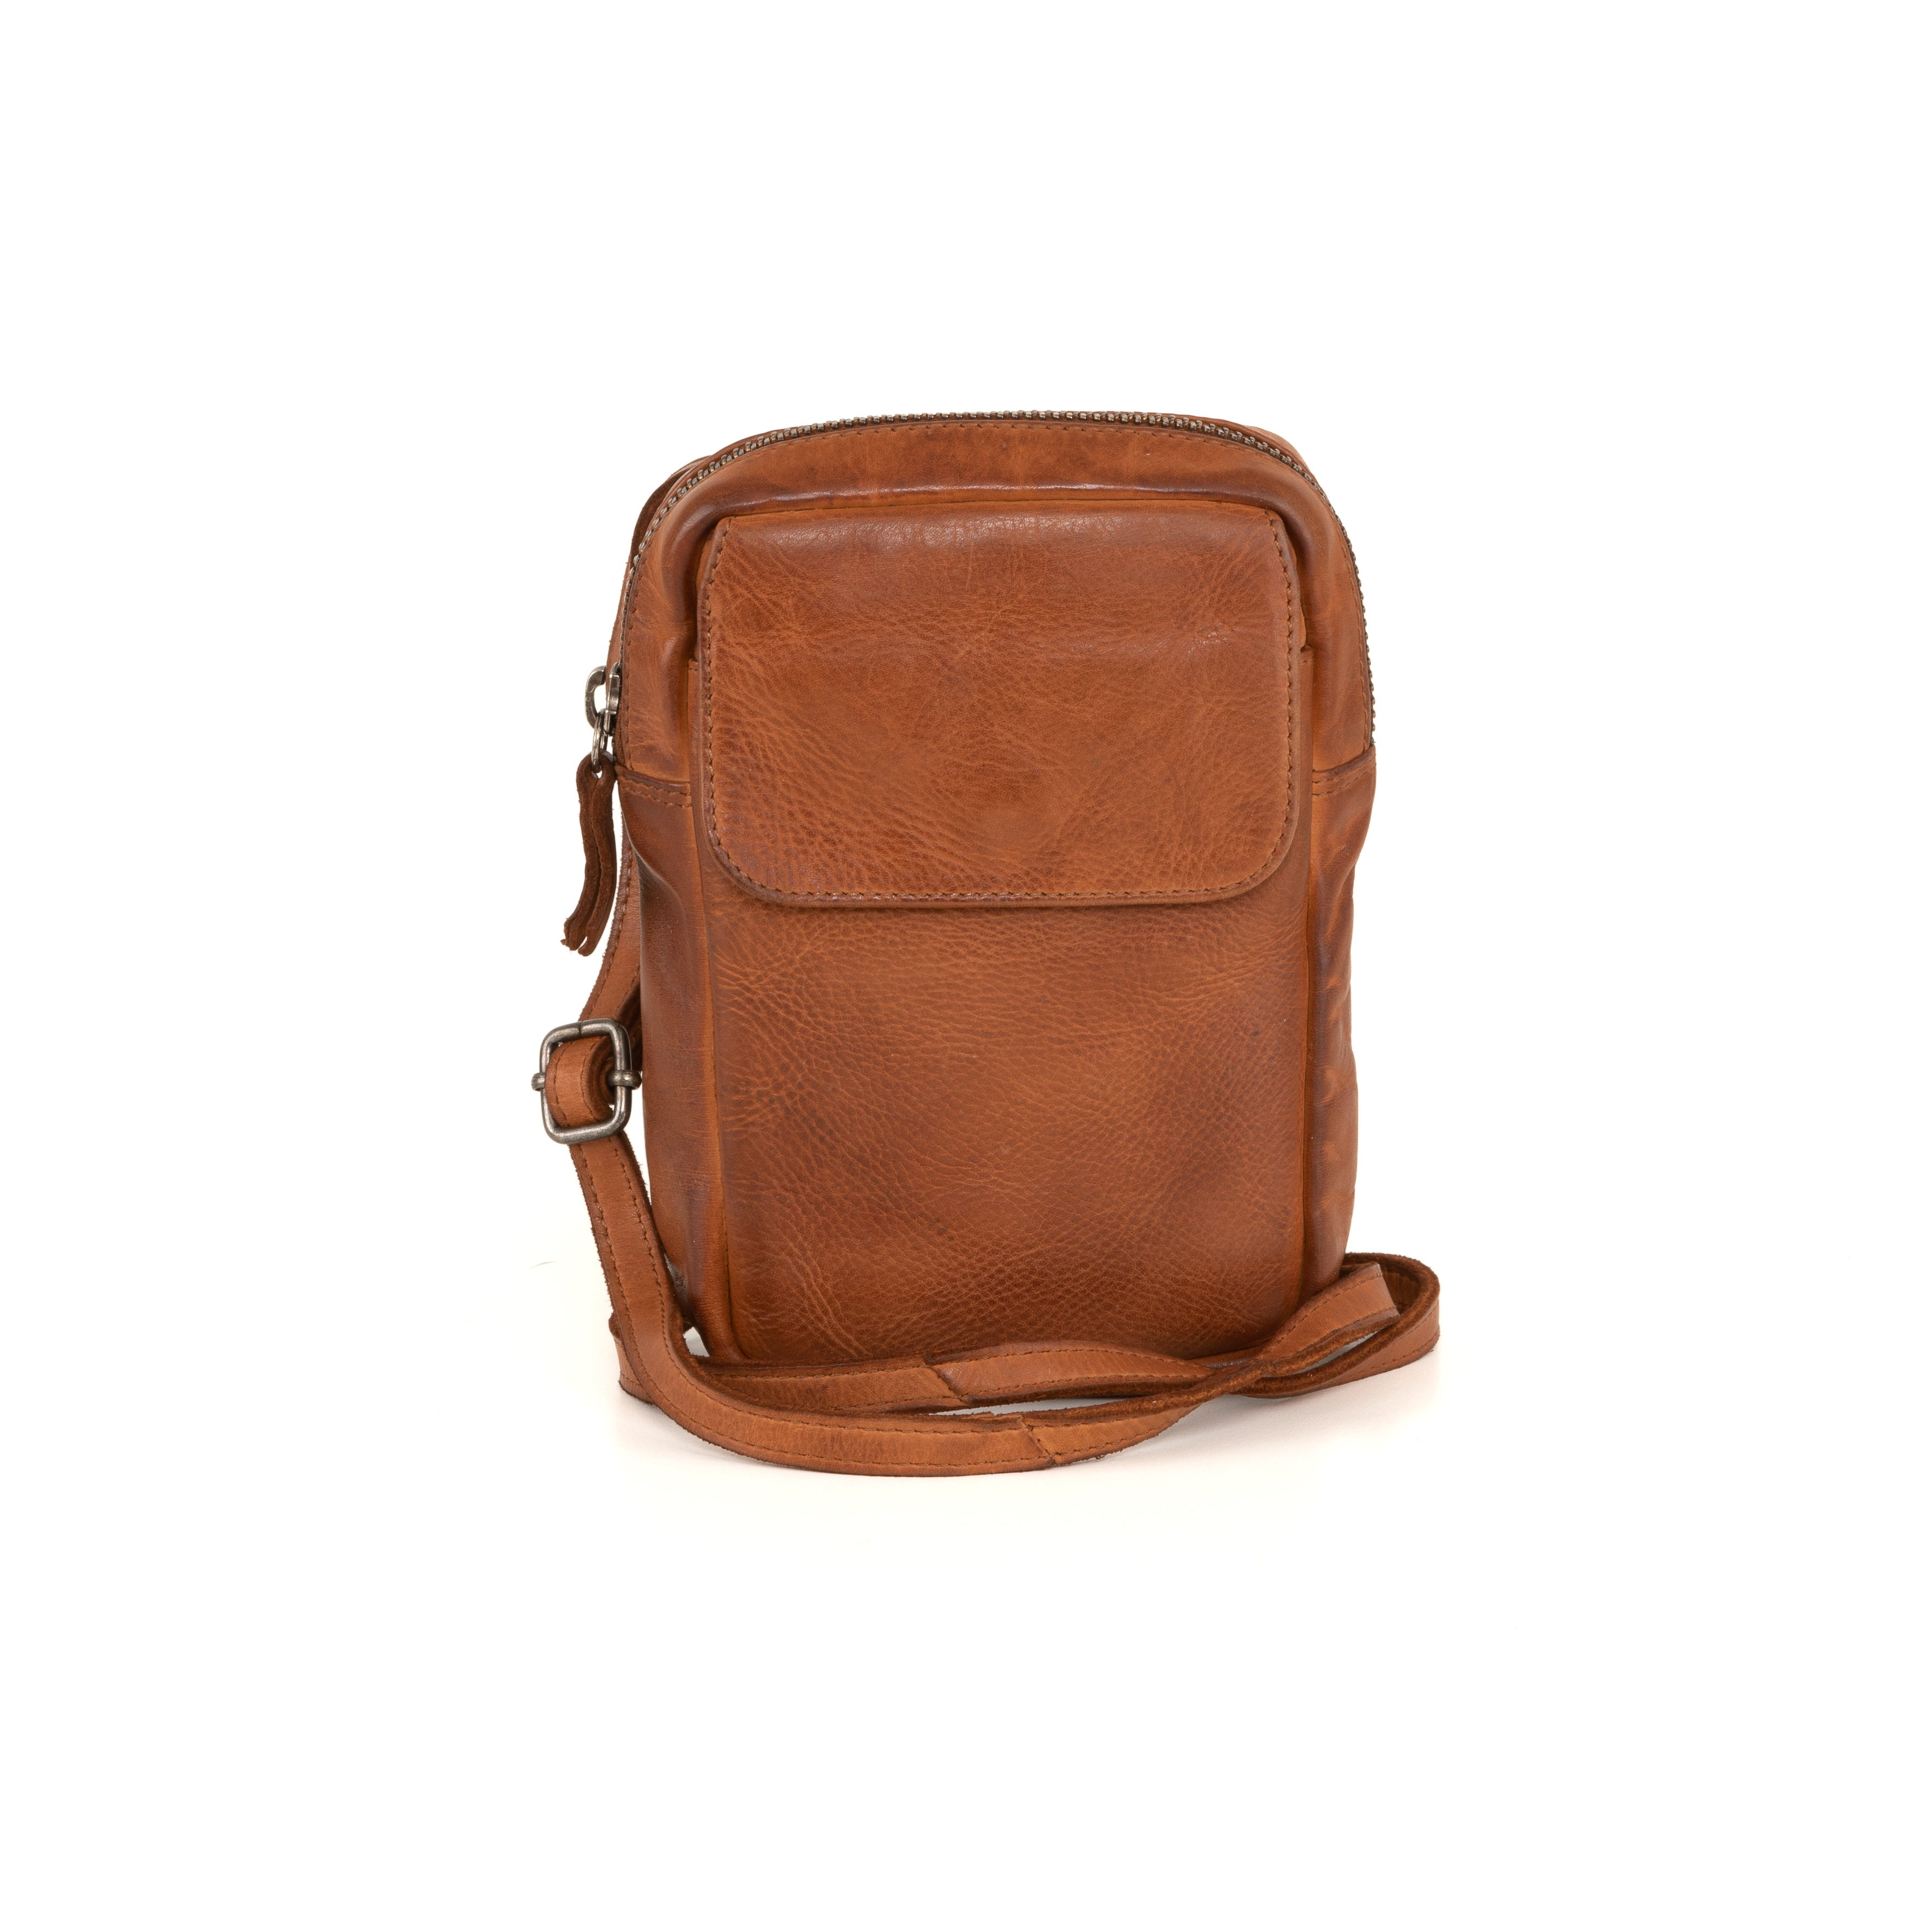 Cora Cognac Leather Crossbody Bag by Gianni Conti